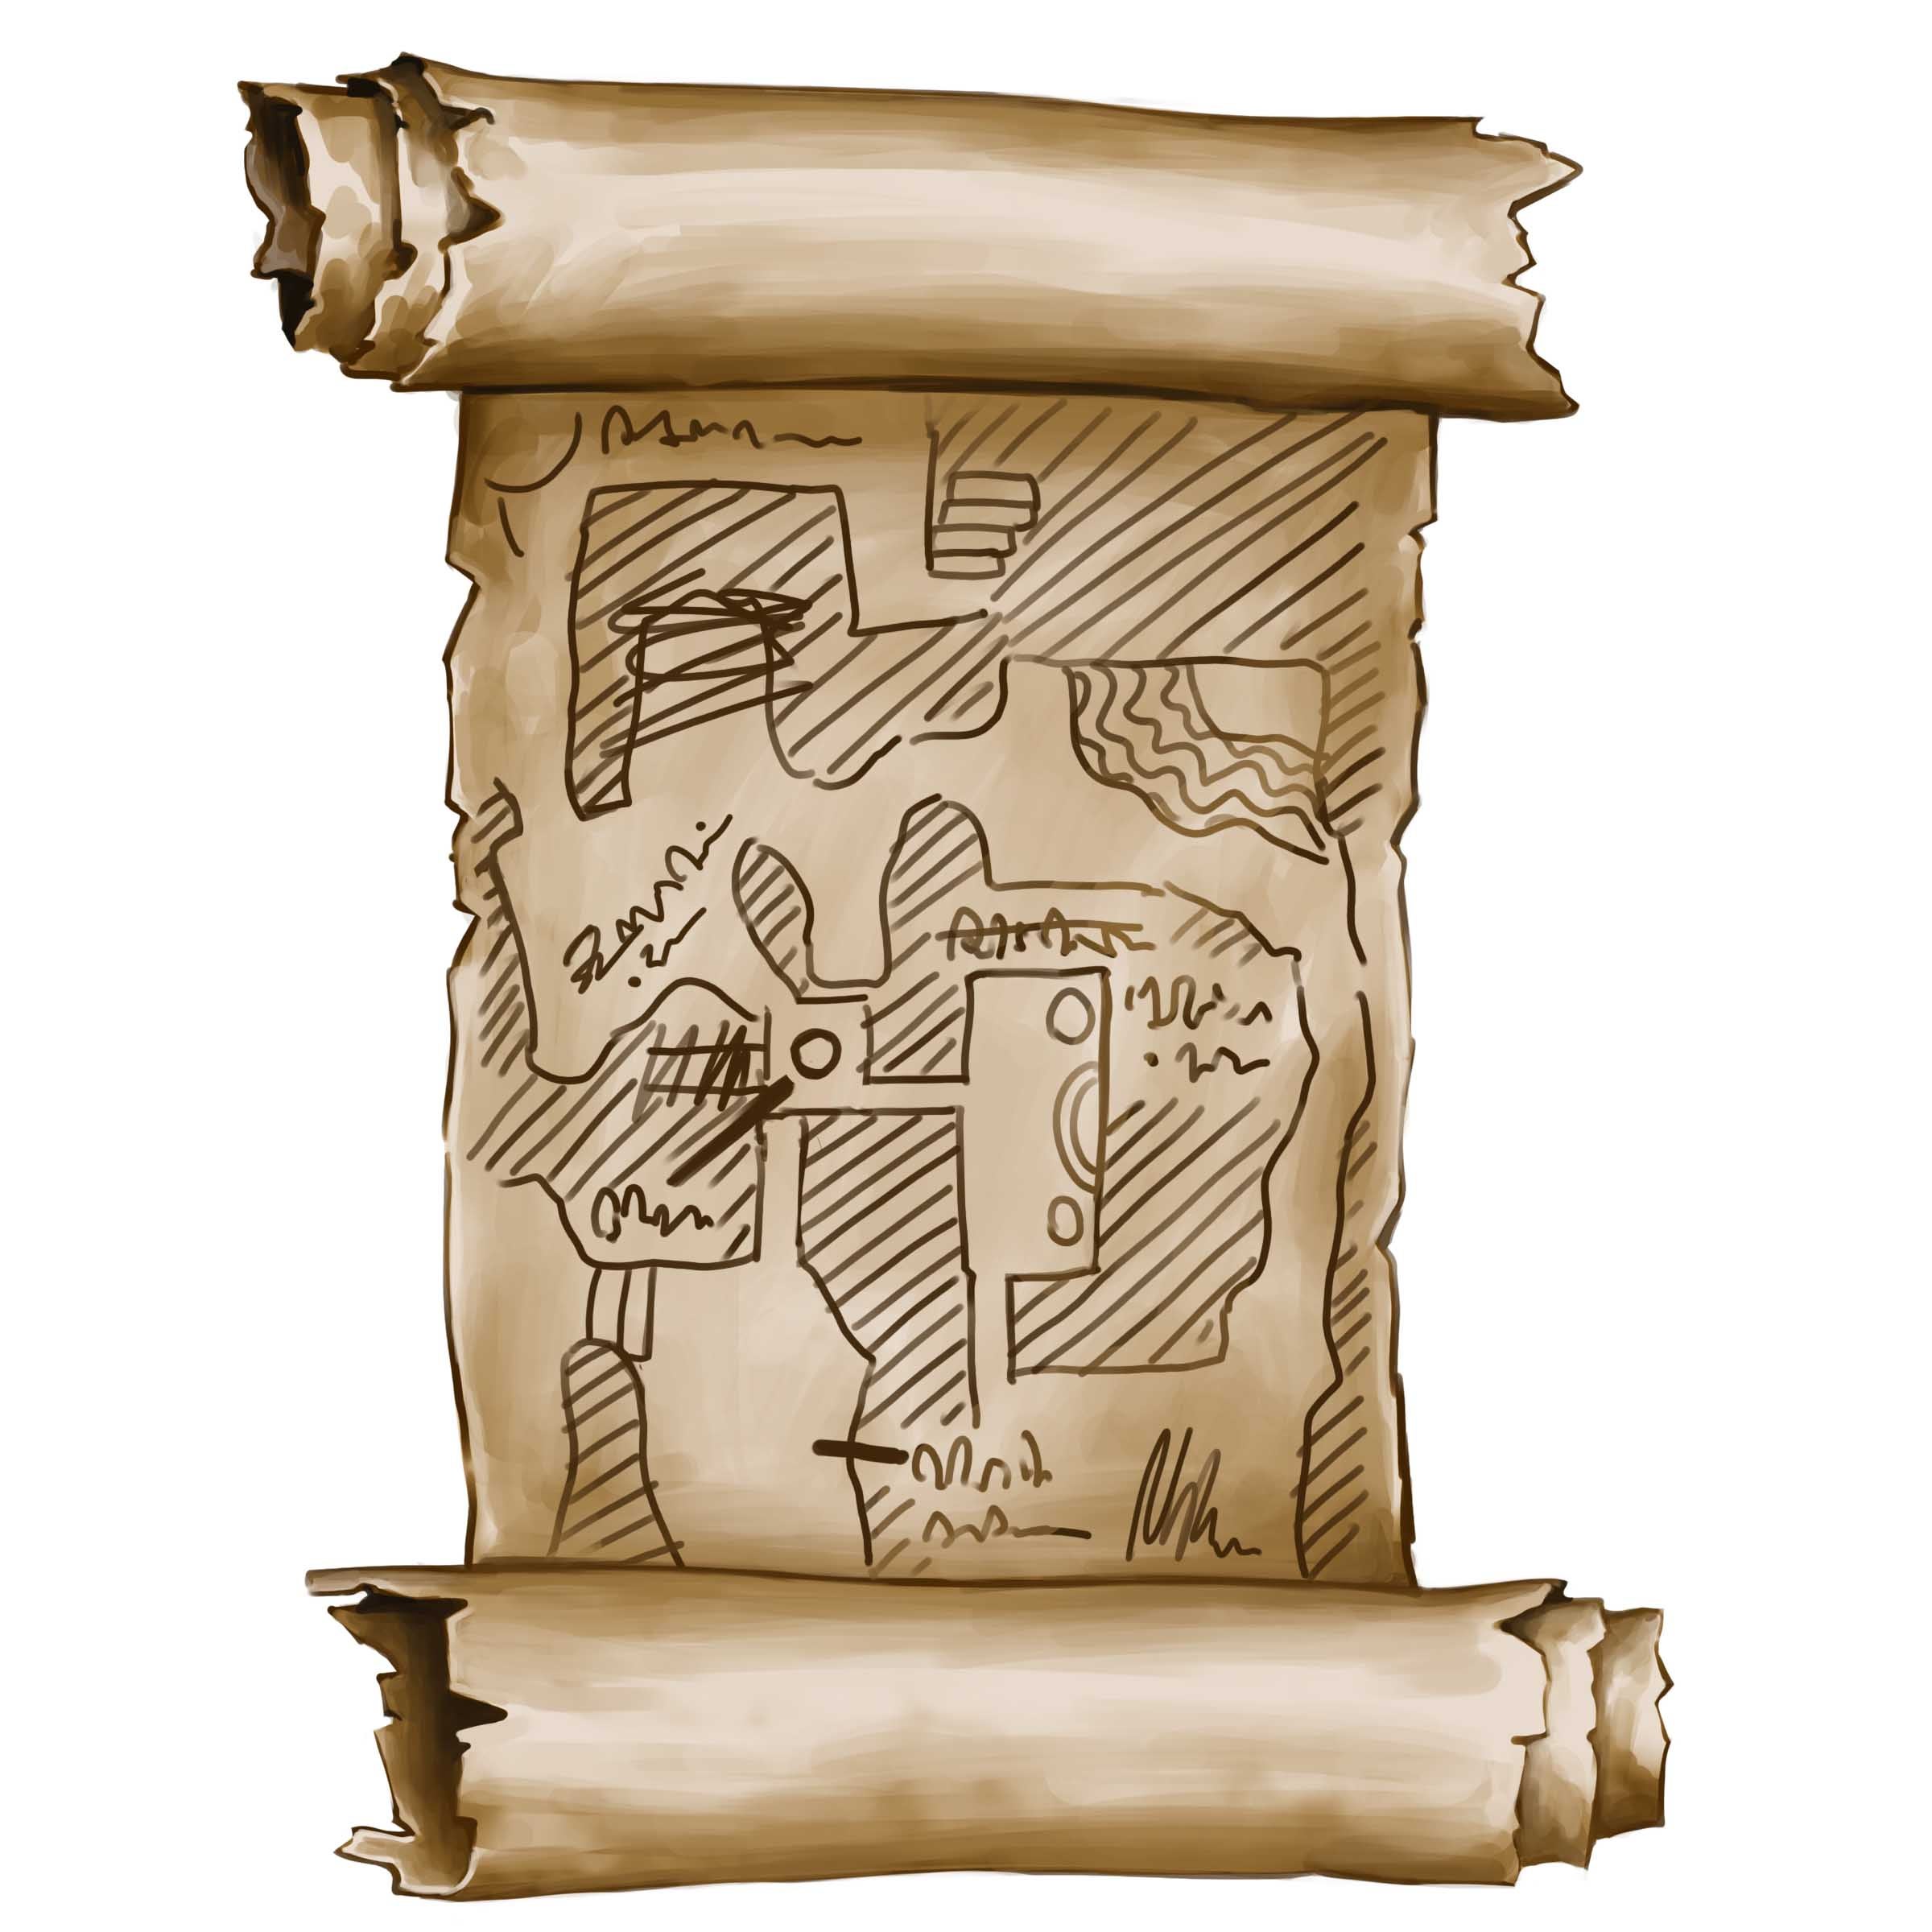 Illustration of a hand drawn dungeon map on an unrolled scroll.